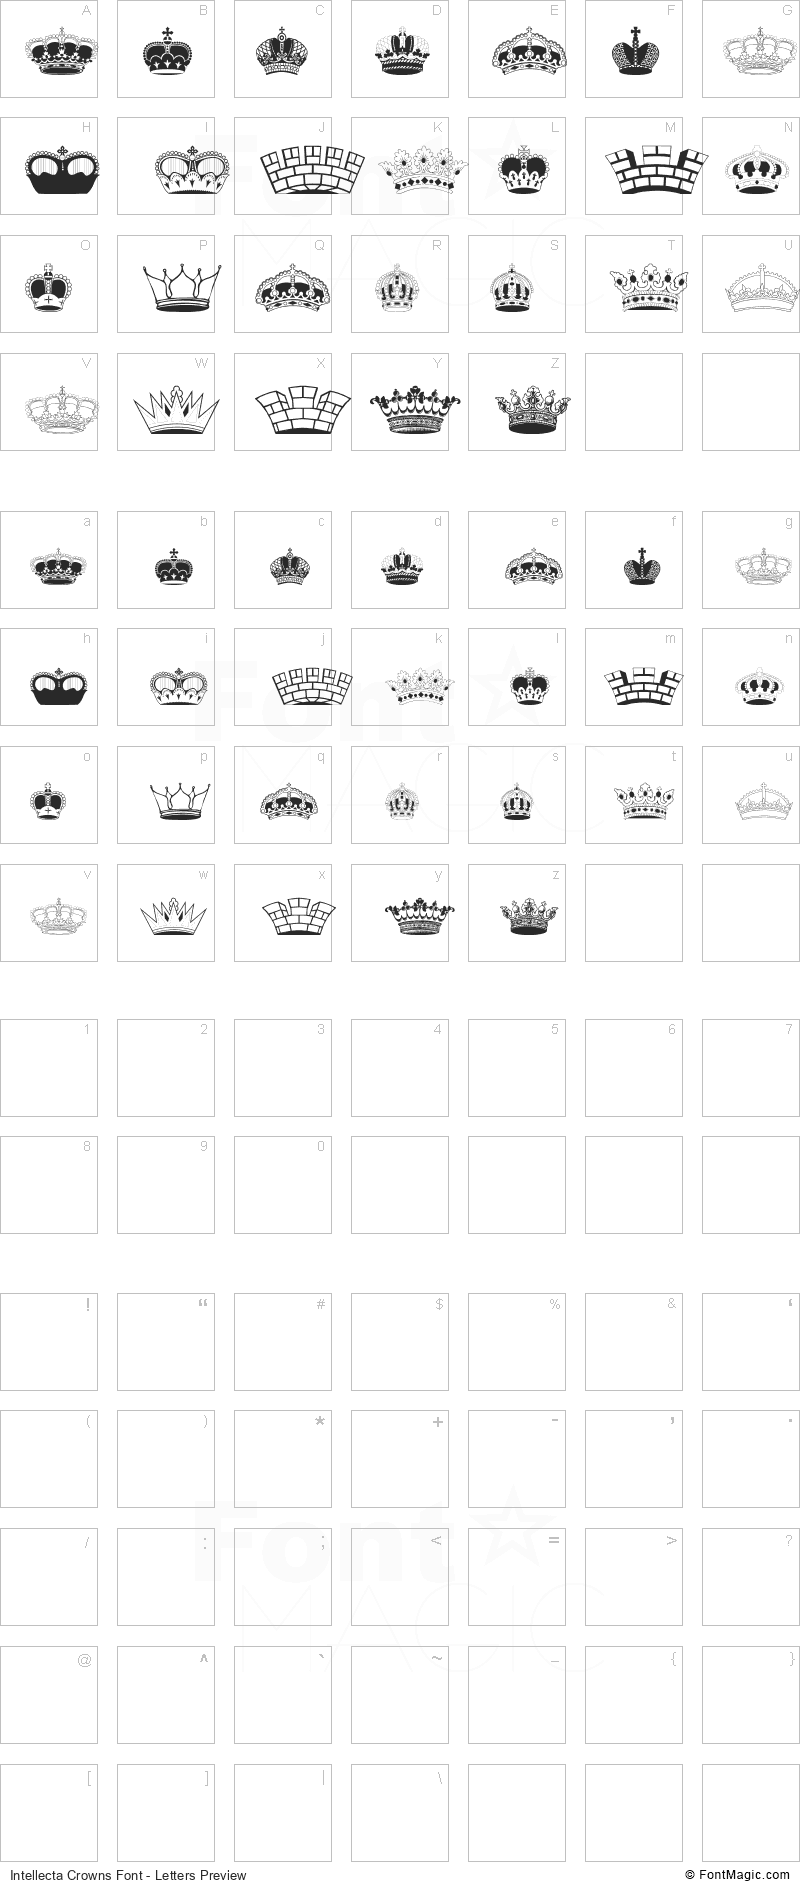 Intellecta Crowns Font - All Latters Preview Chart